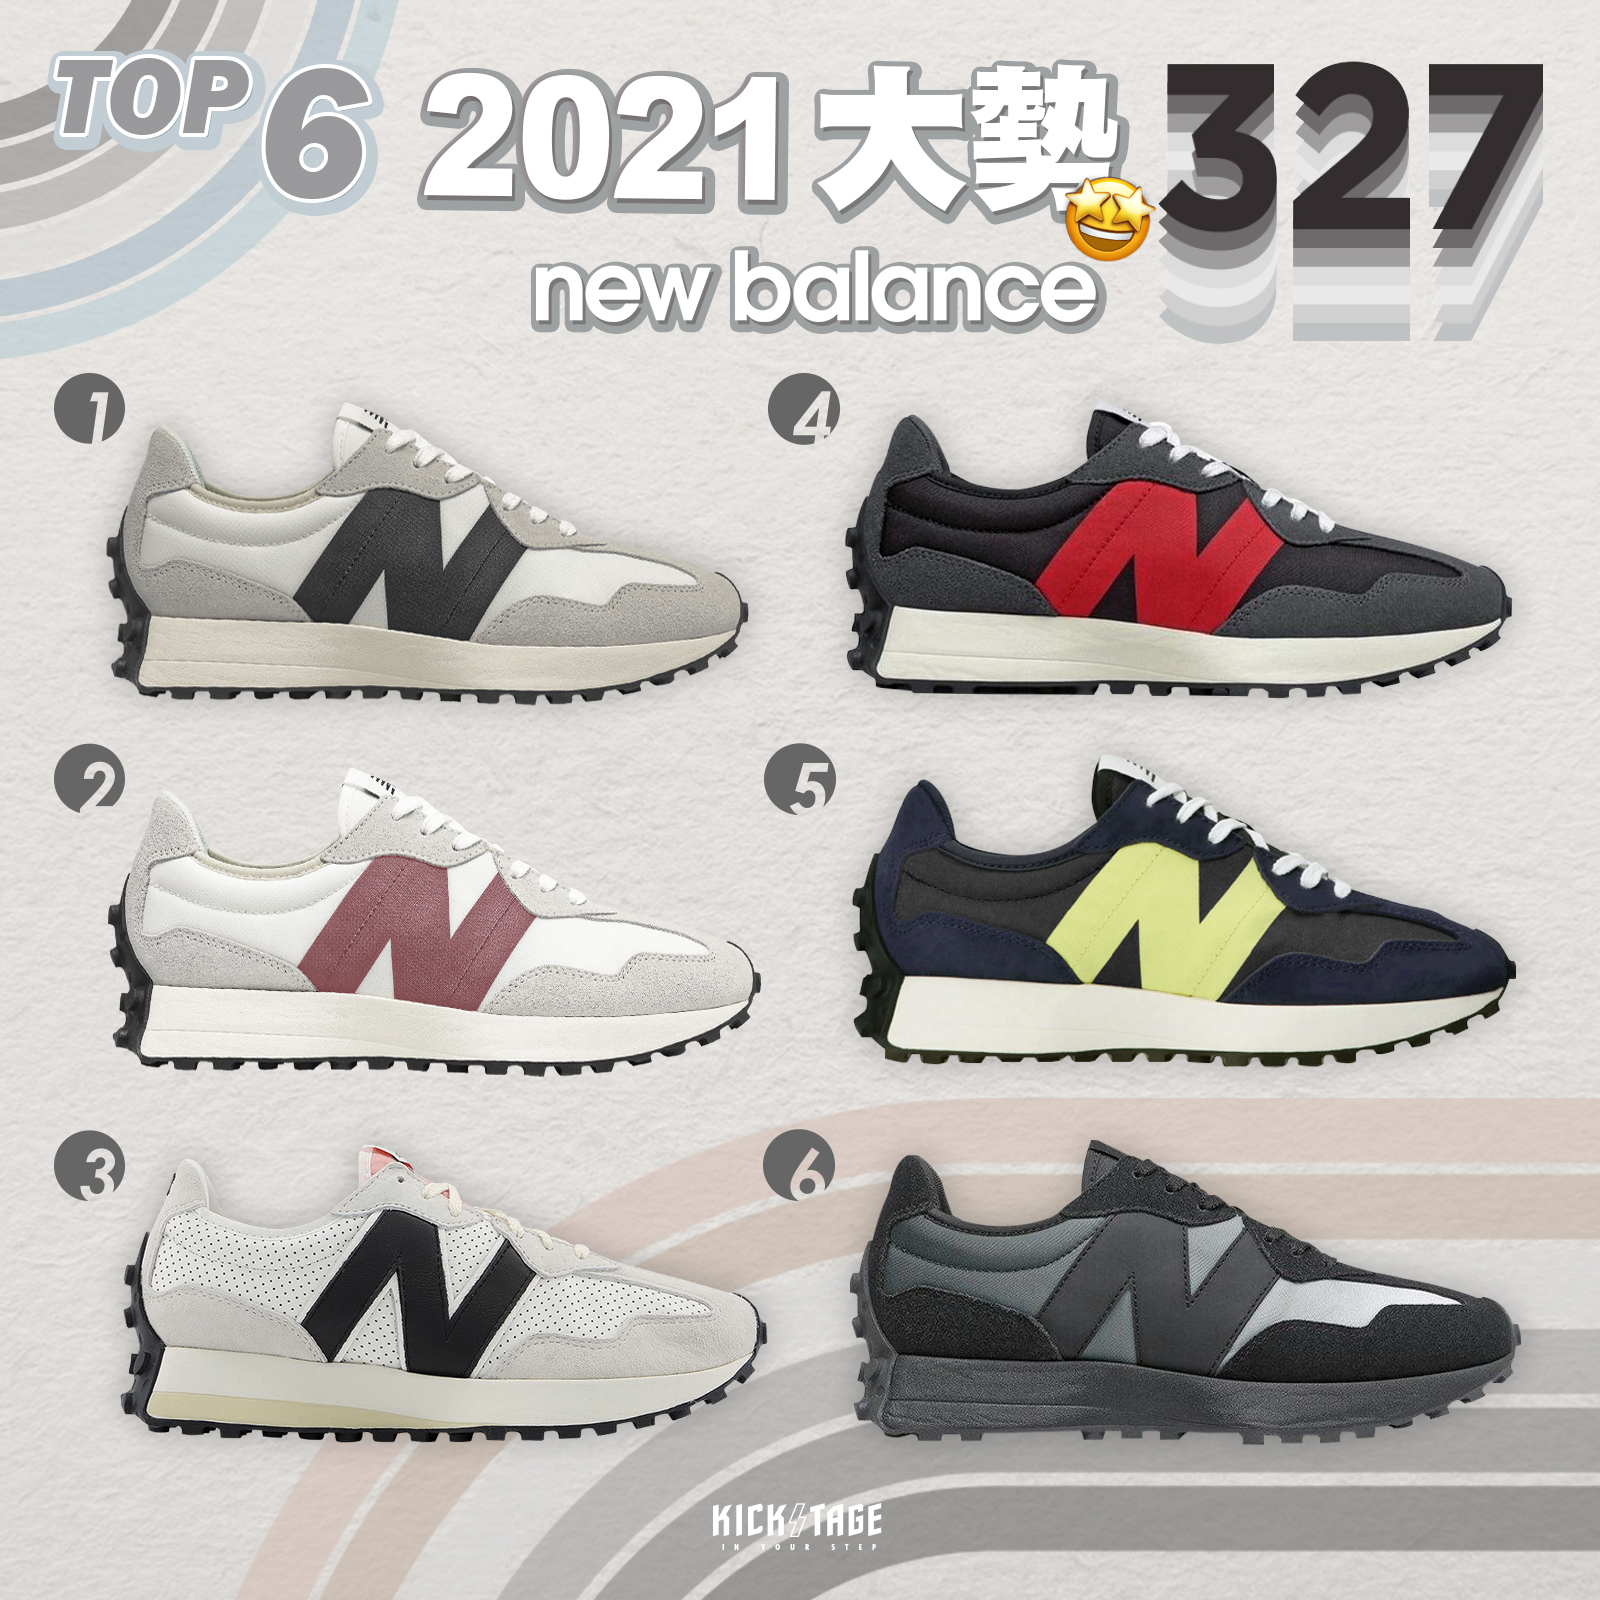 whale Airlines Curiosity 2021 大勢new balance 327 配色TOP6！